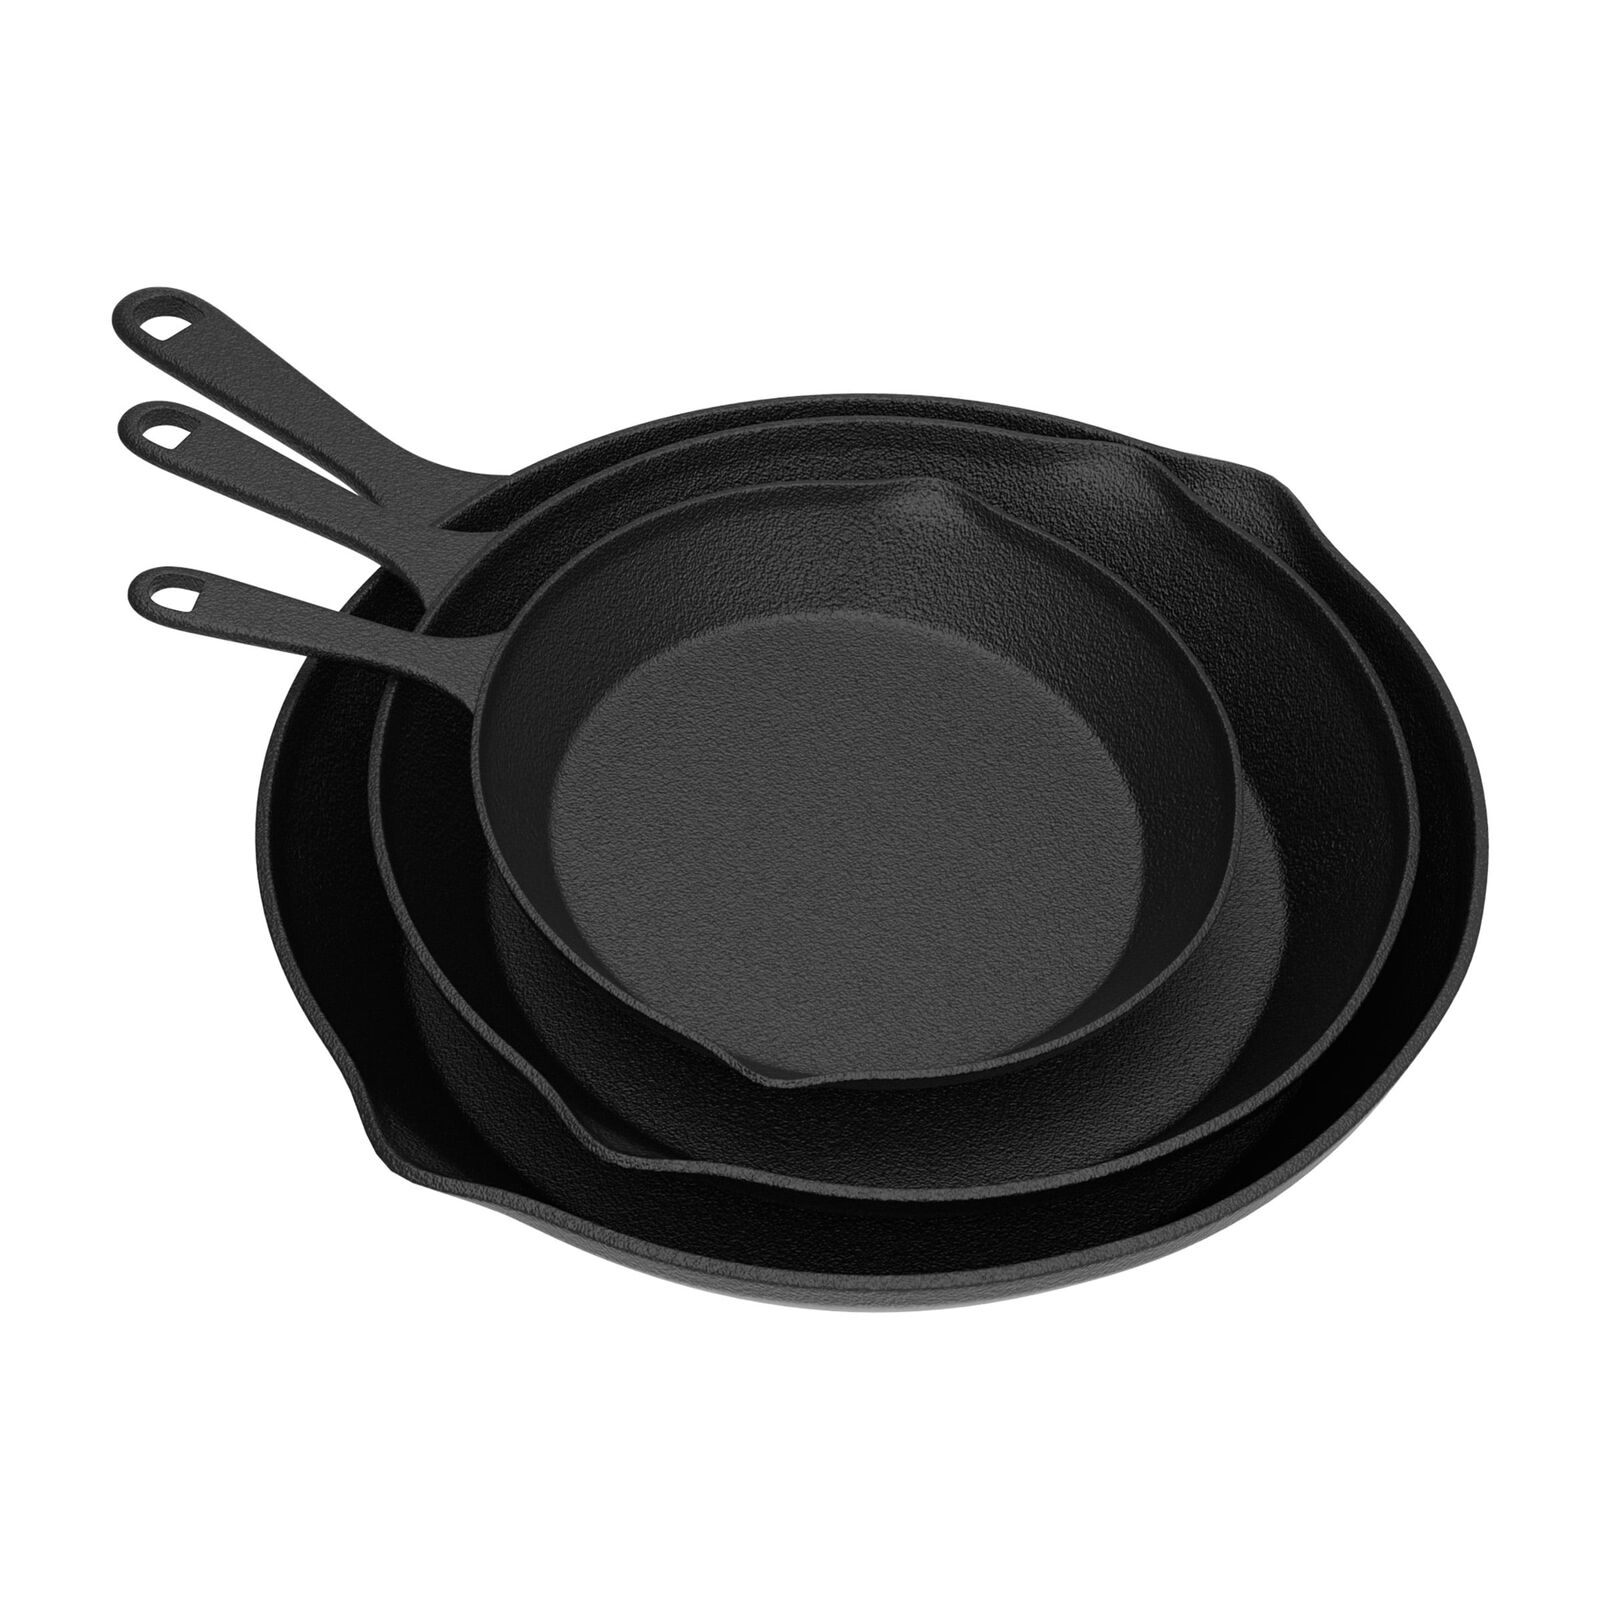 Frying Pans-Set of 3 Cast Iron Pre-Seasoned Nonstick Skillets in 10”, 8”, 6”,New